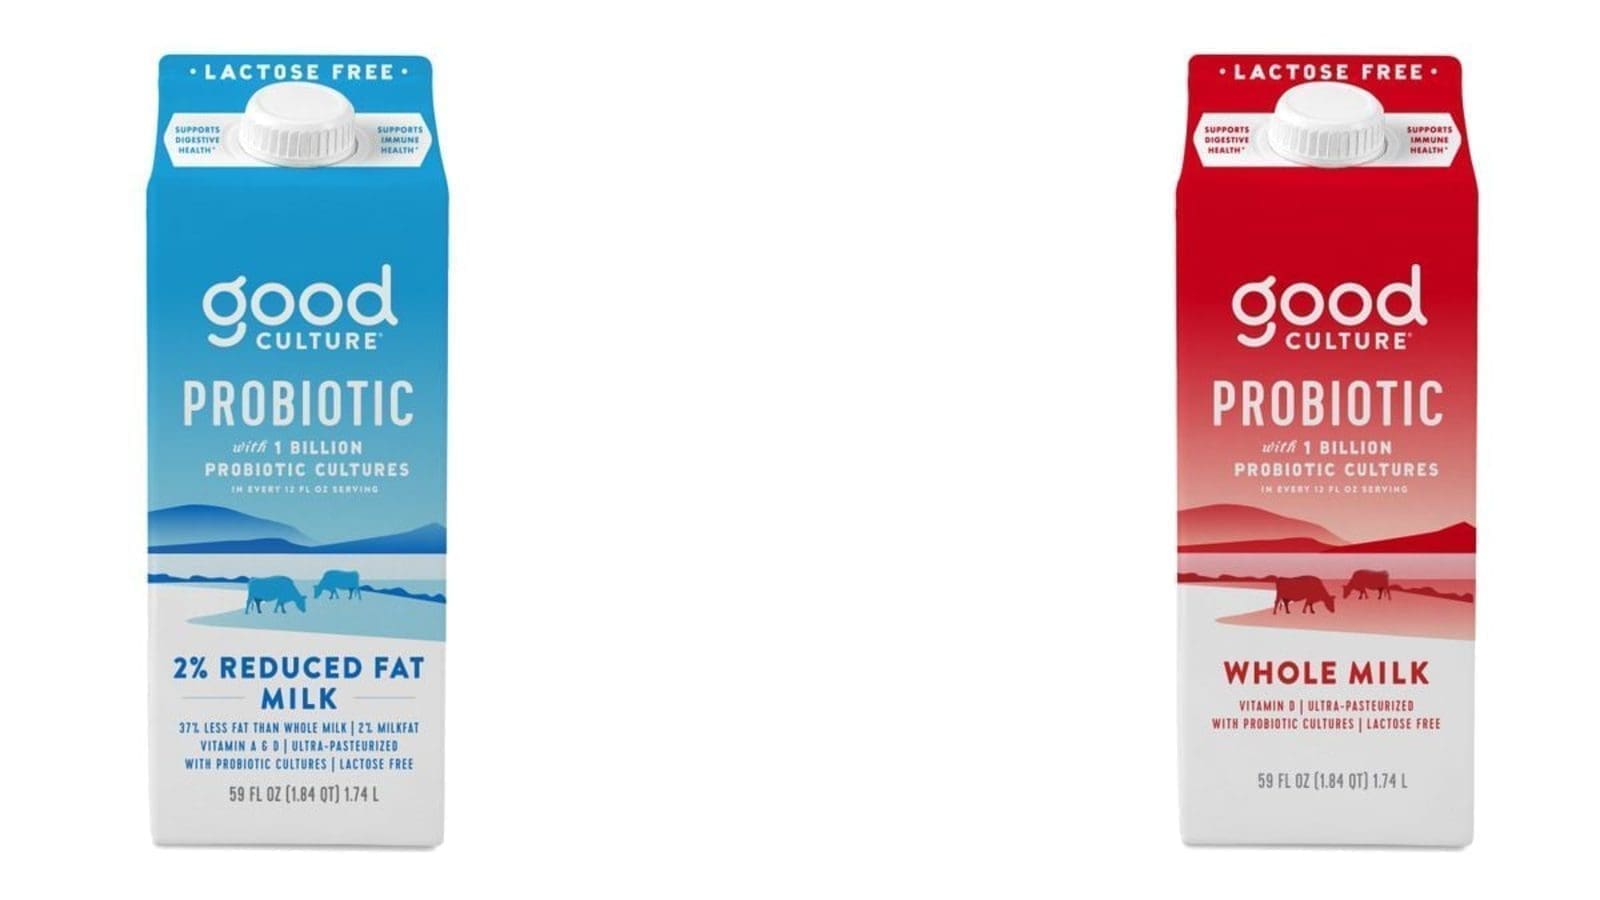 Good Culture forms alliance with American dairy giant DFA to launch probiotic milk